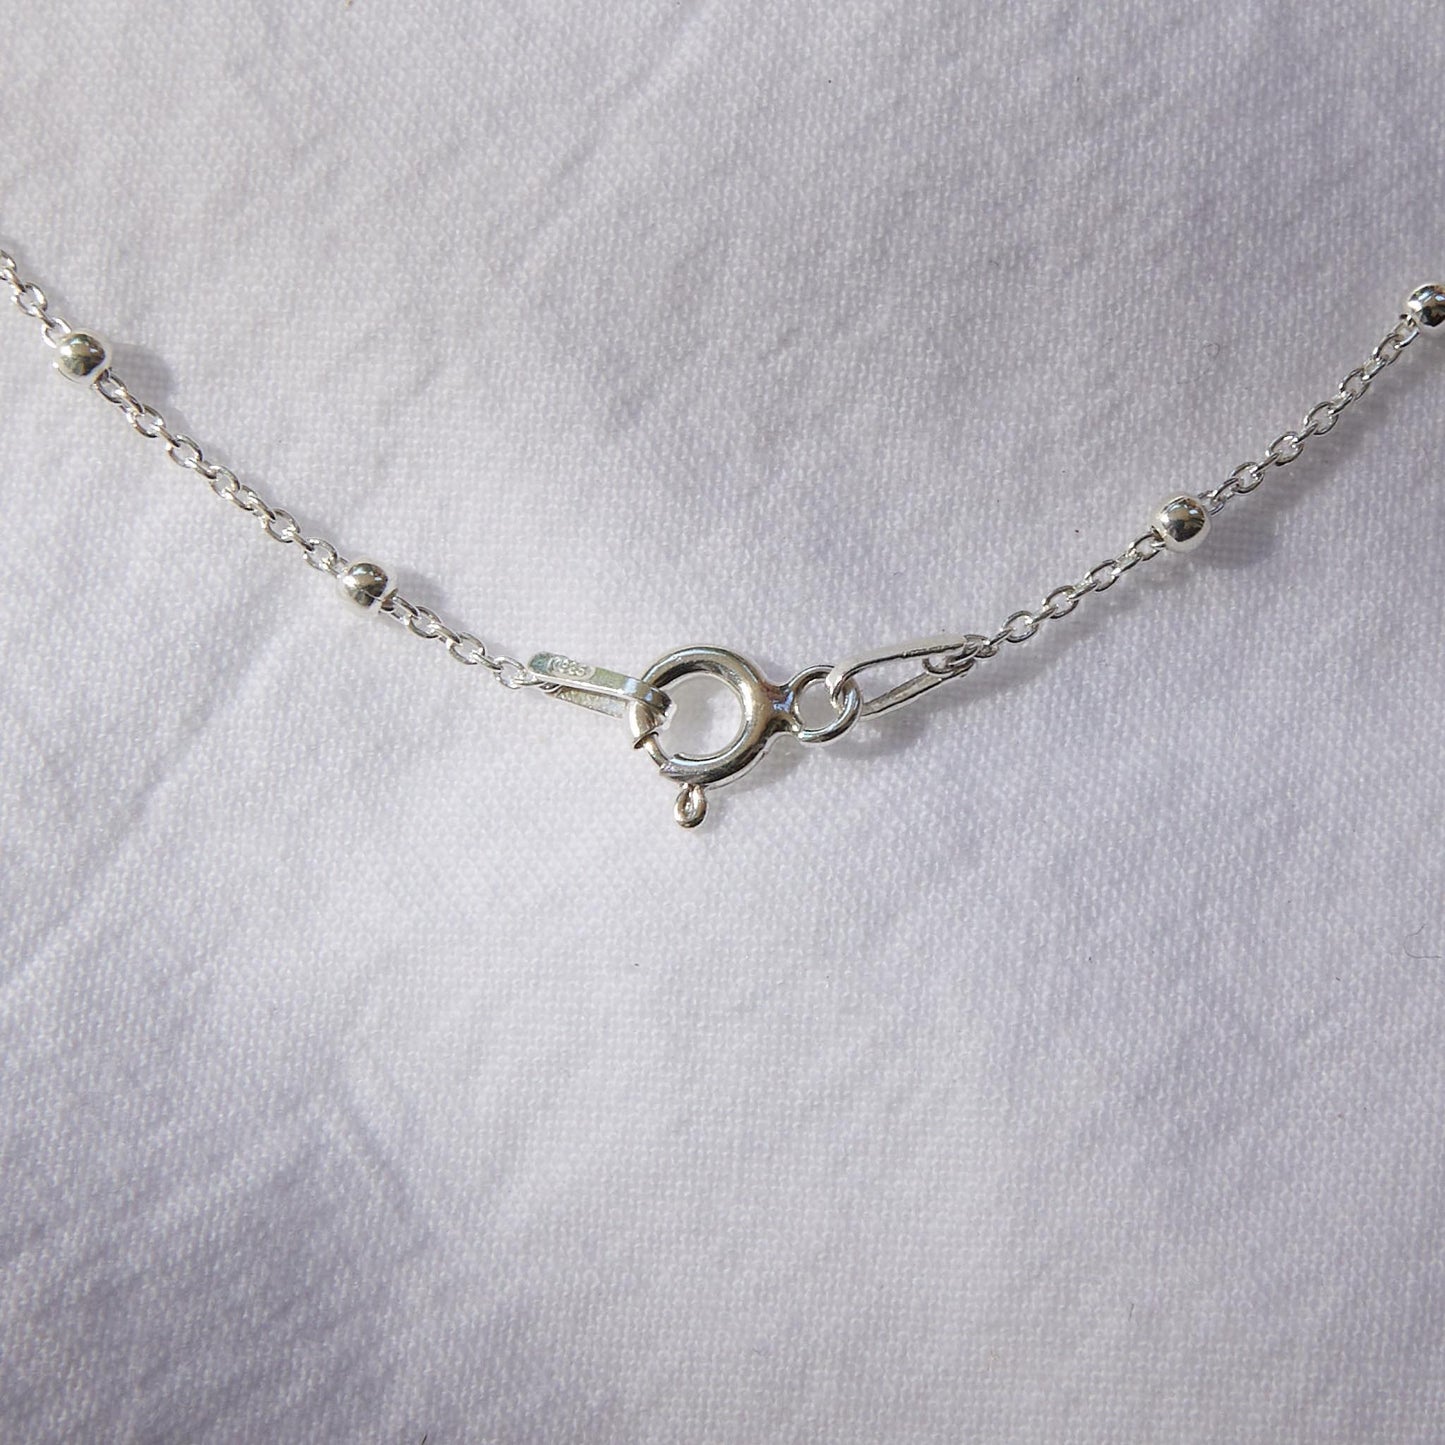 Sterling silver ball chain